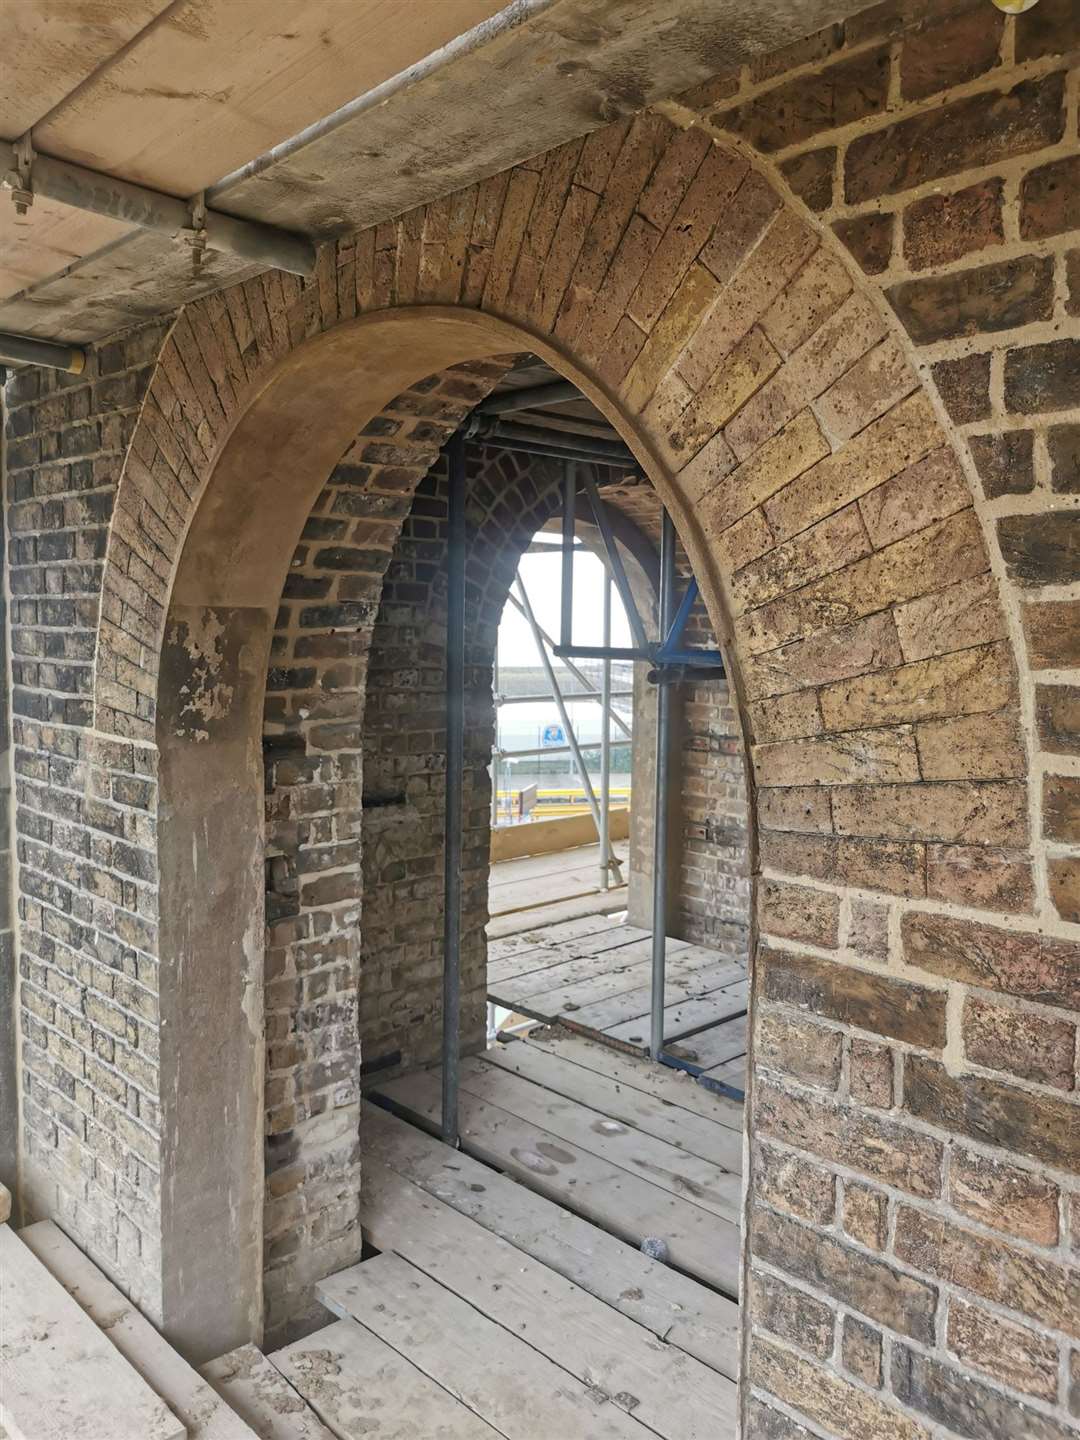 One of the many brick arches at the Sheerness Dockyard church in Blue Town has been refurbished